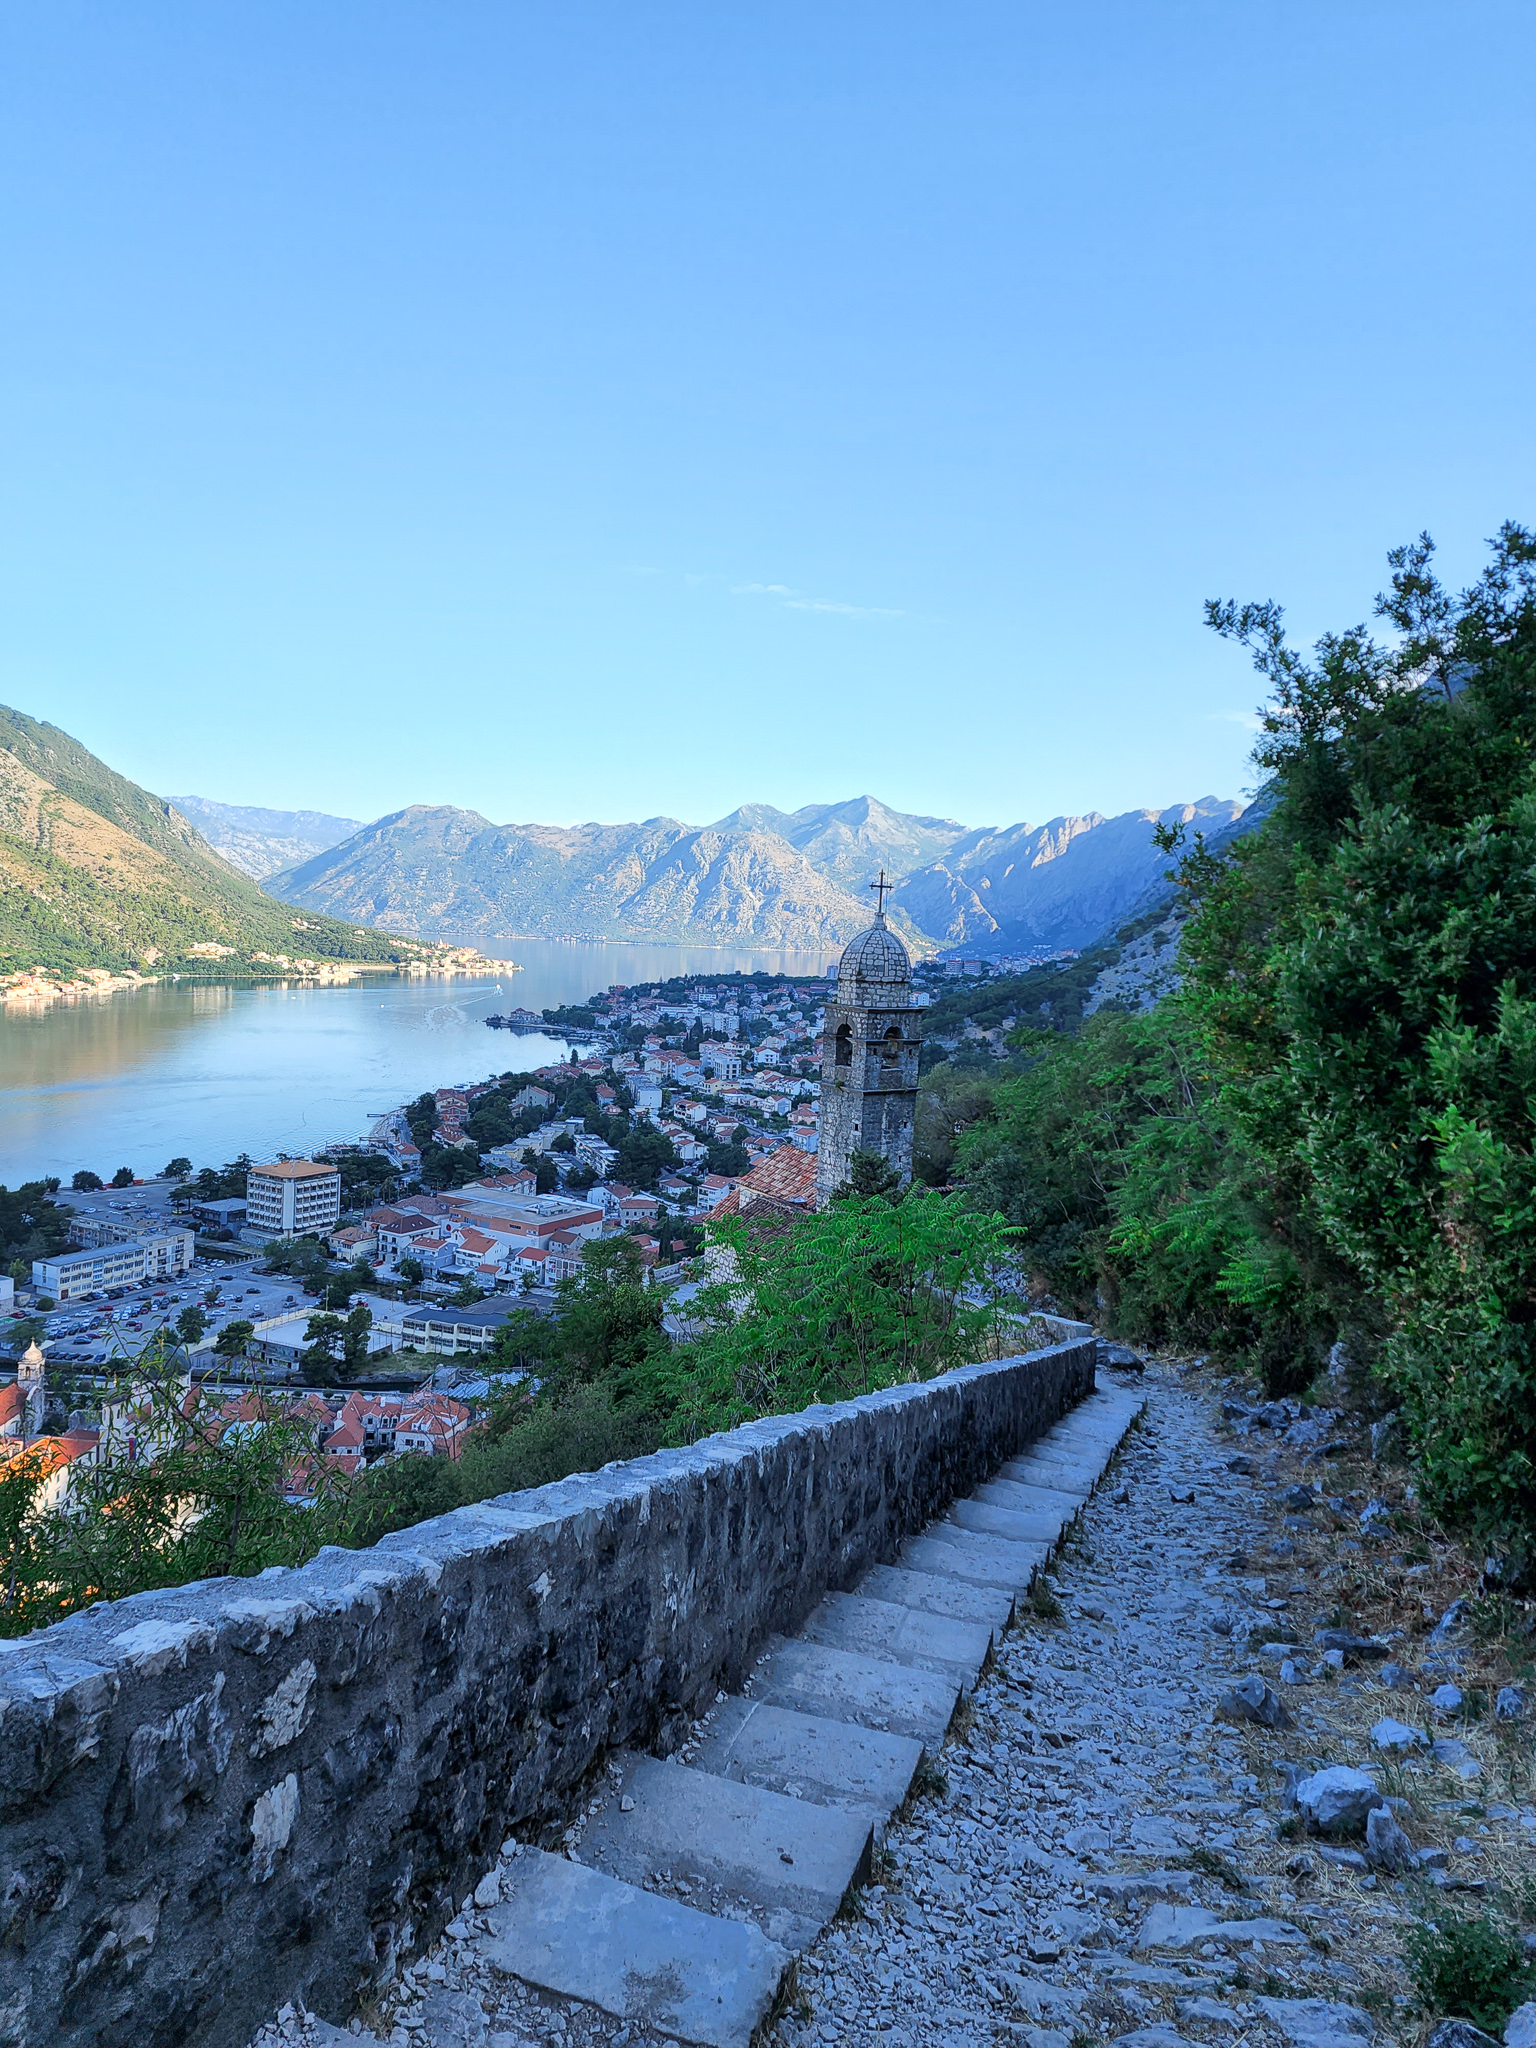 Hiking to Montenegro's Kotor Fortress – Travels With Tricia